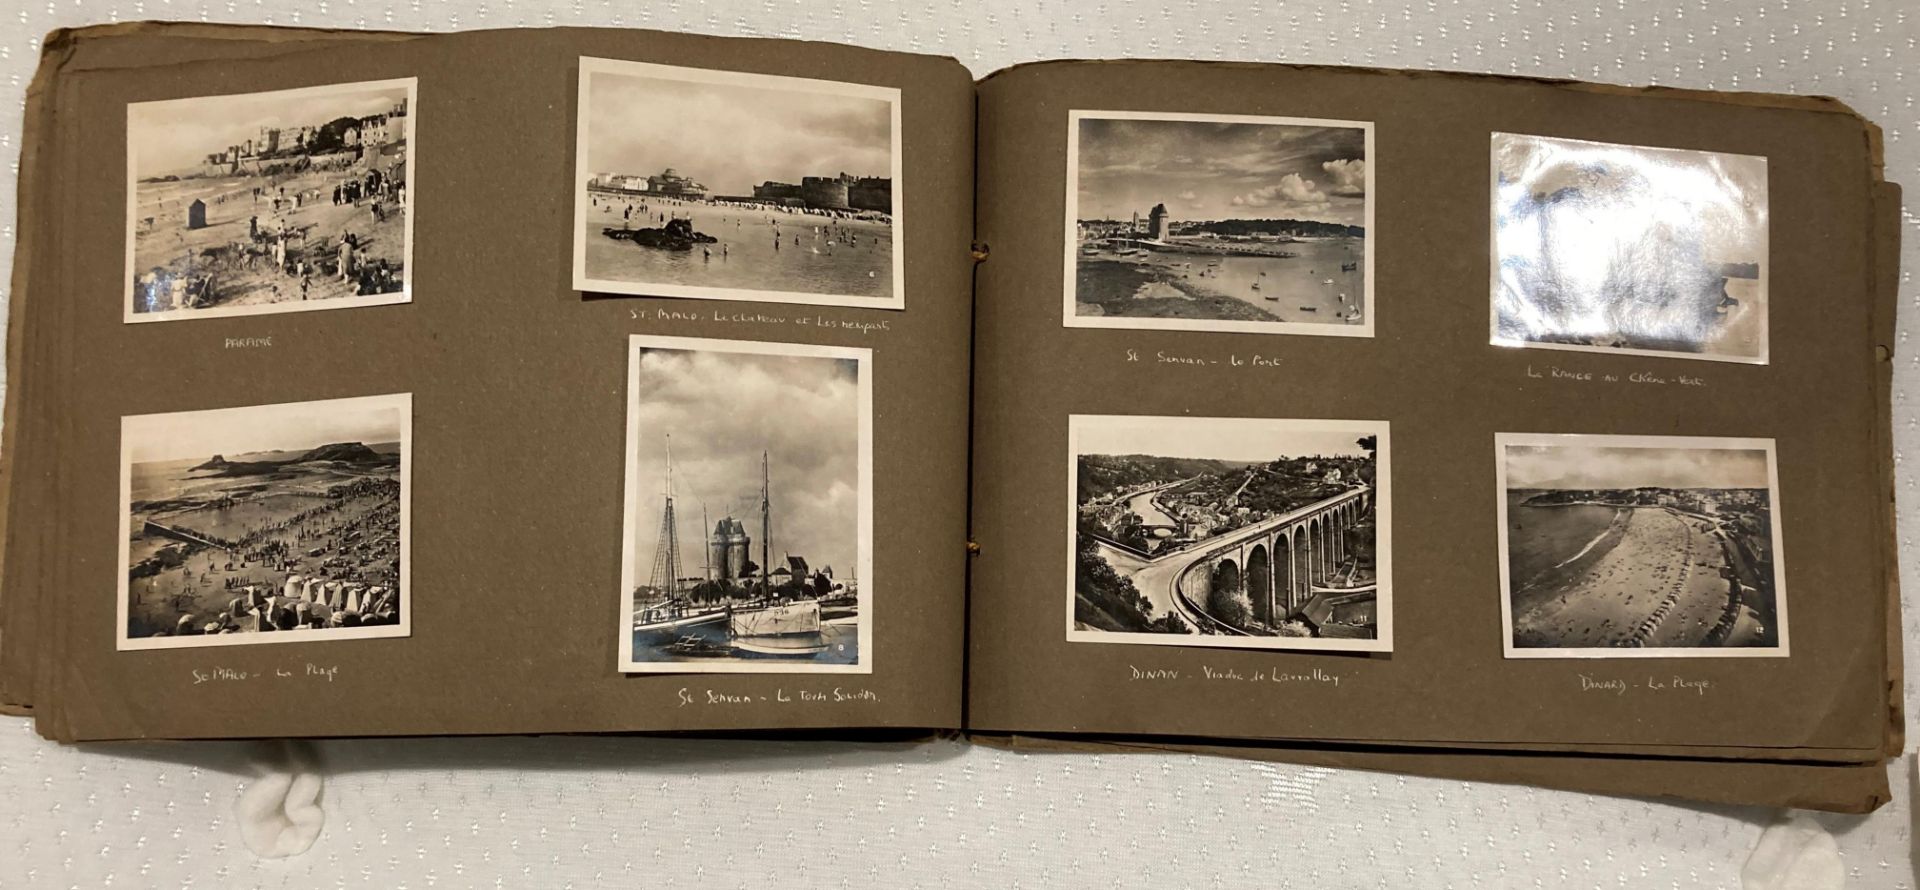 Snapshot album containing 86 postcards and photographs of European scenes - Brussels, - Image 5 of 5